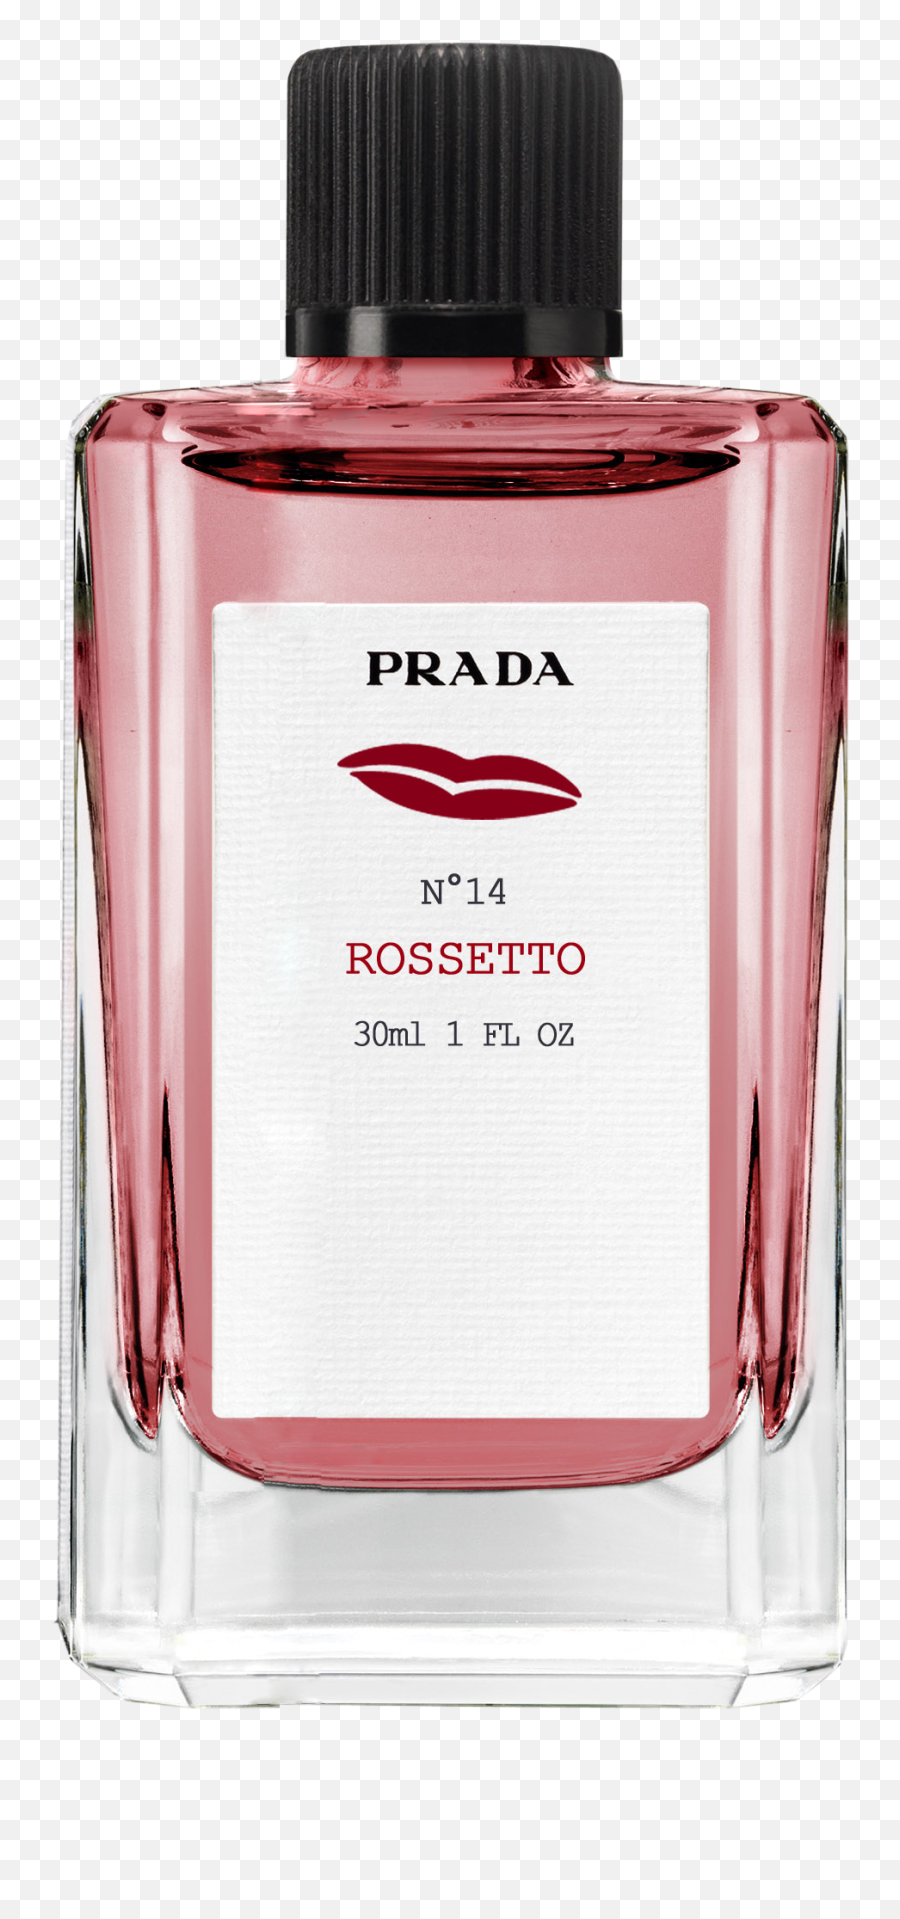 Perfume Bottle Png - Prada No 14 Rossetto,Perfume Bottle Png